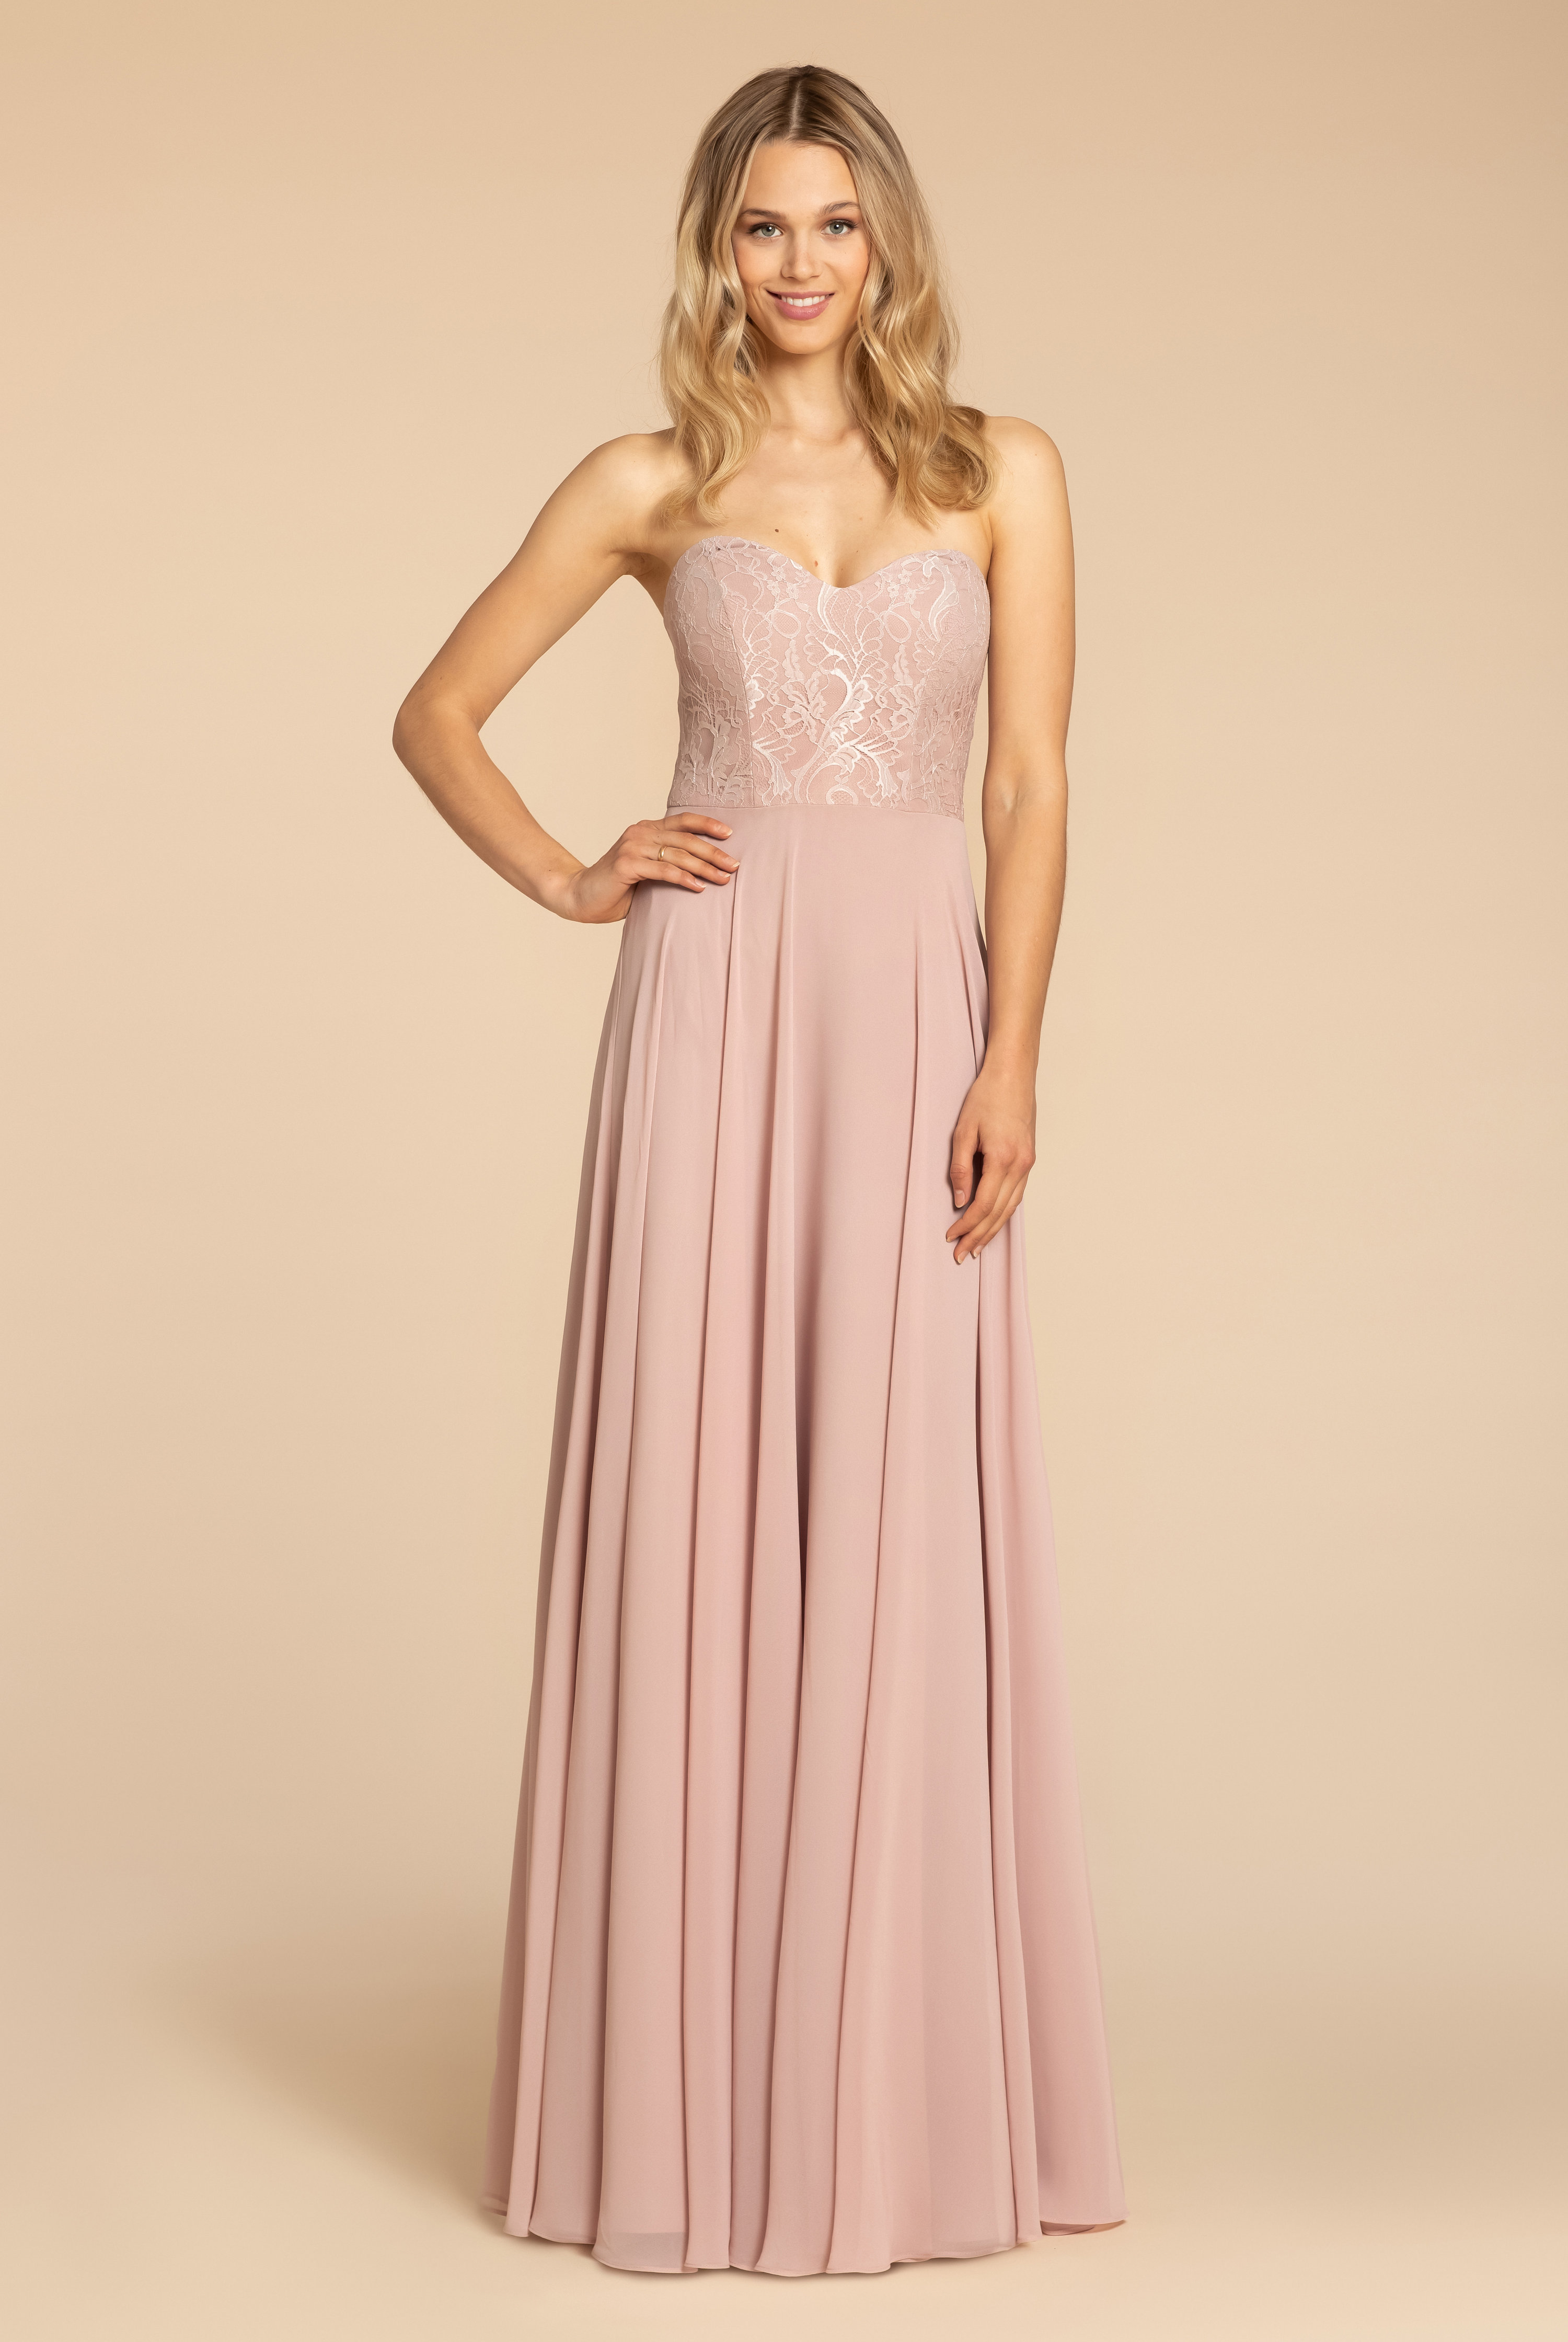 Details about  / Hayley Paige Occasions dusty rose bridesmaid gown Size 12